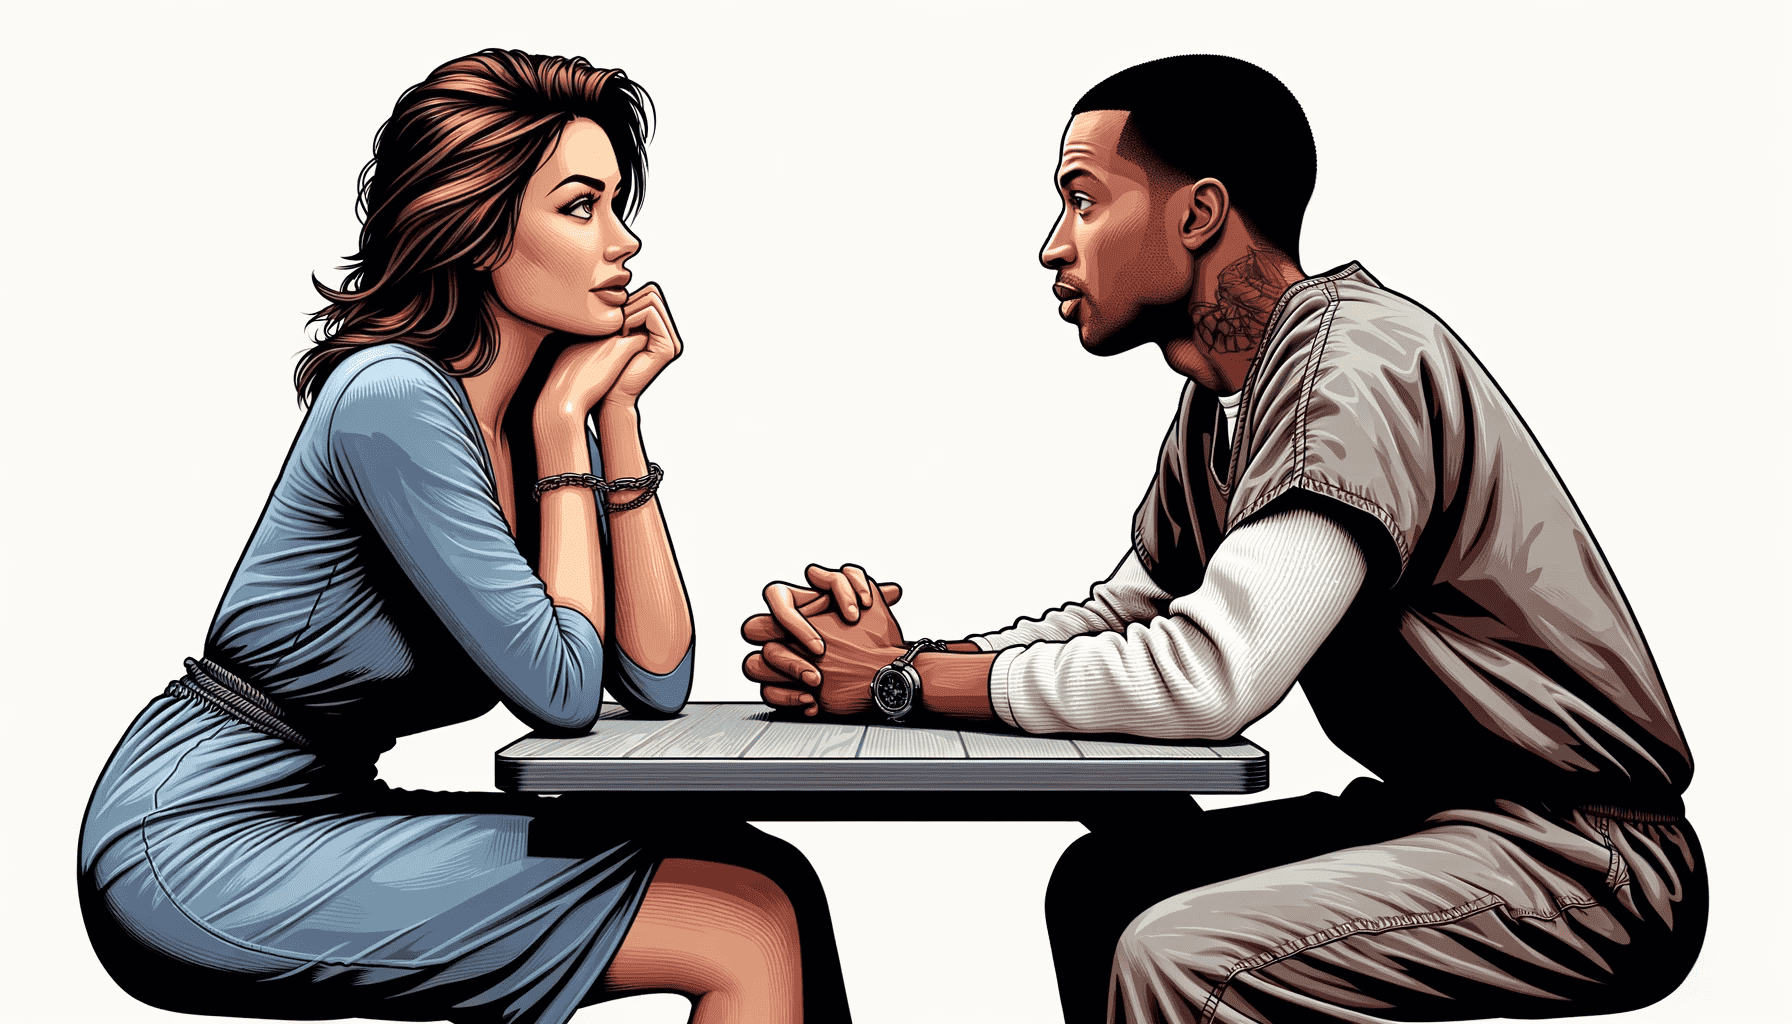 woman conversing with her inmate boyfriend